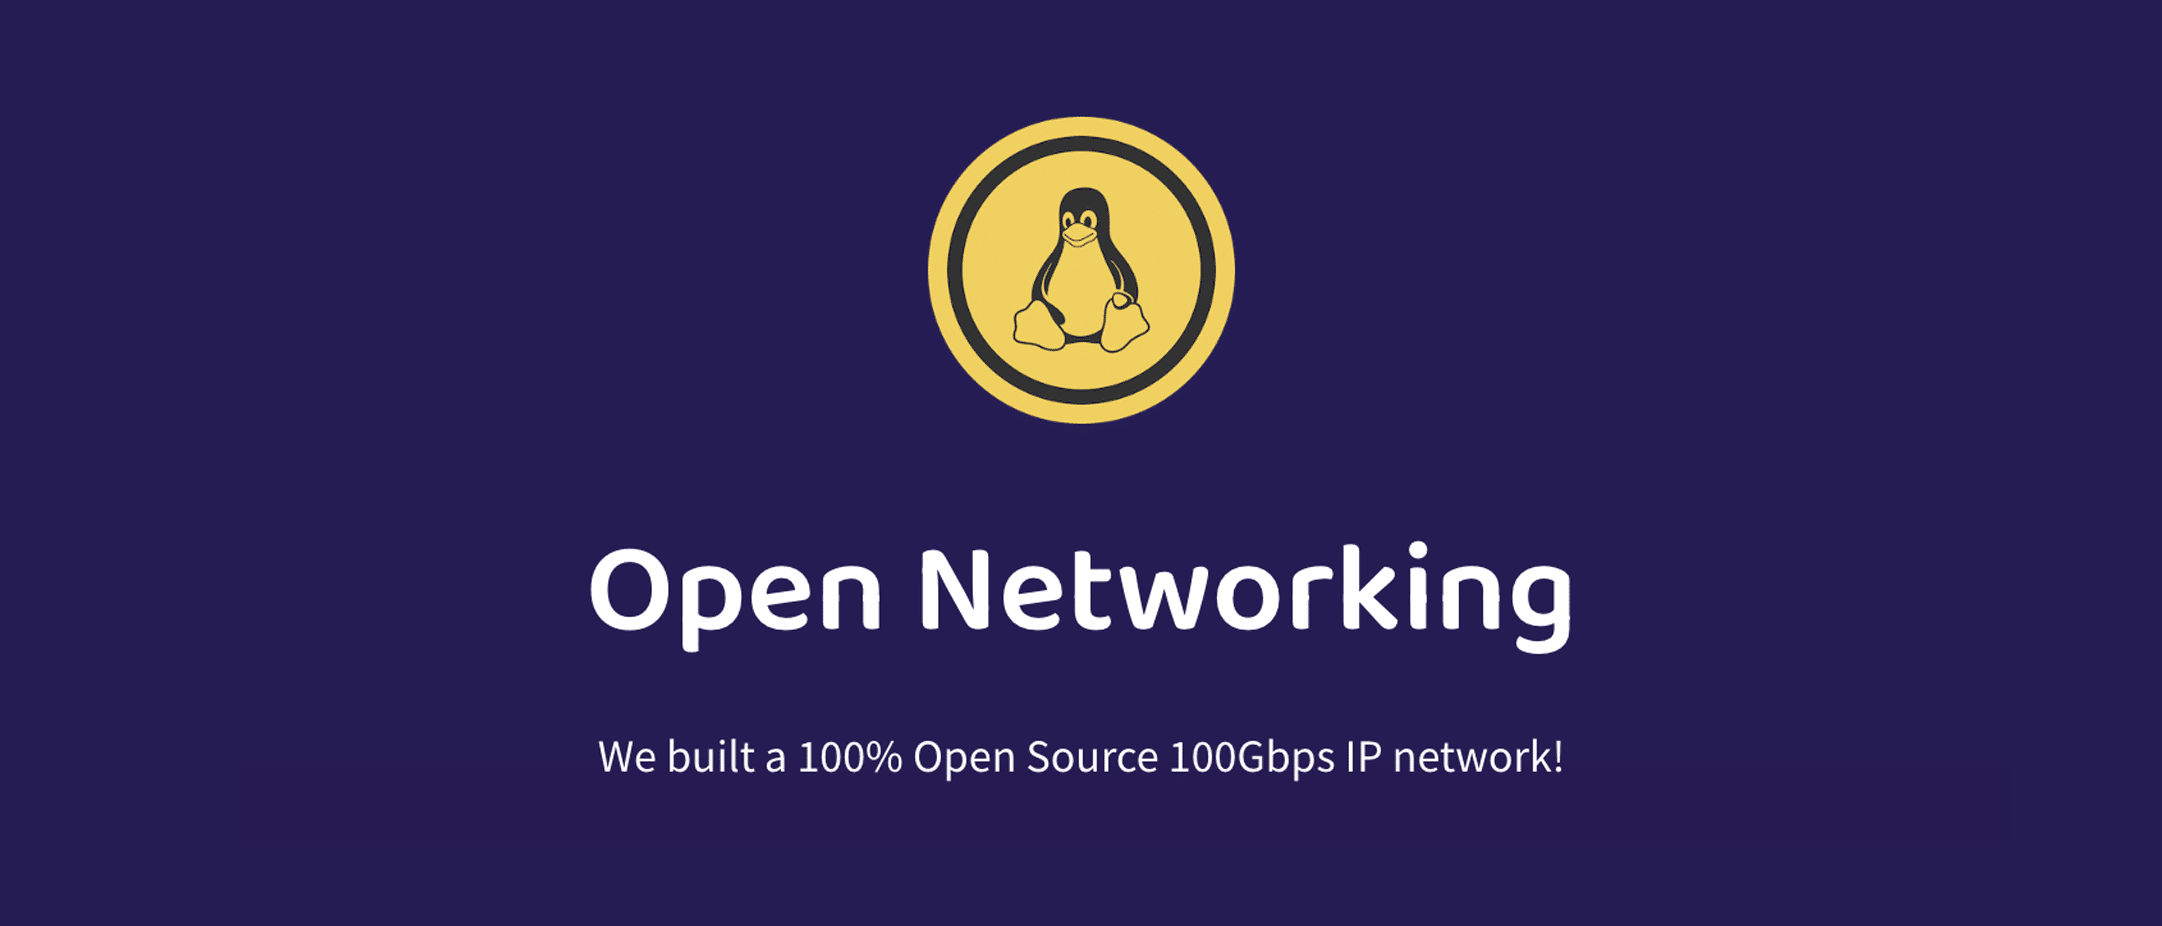 open-networking-featured-image